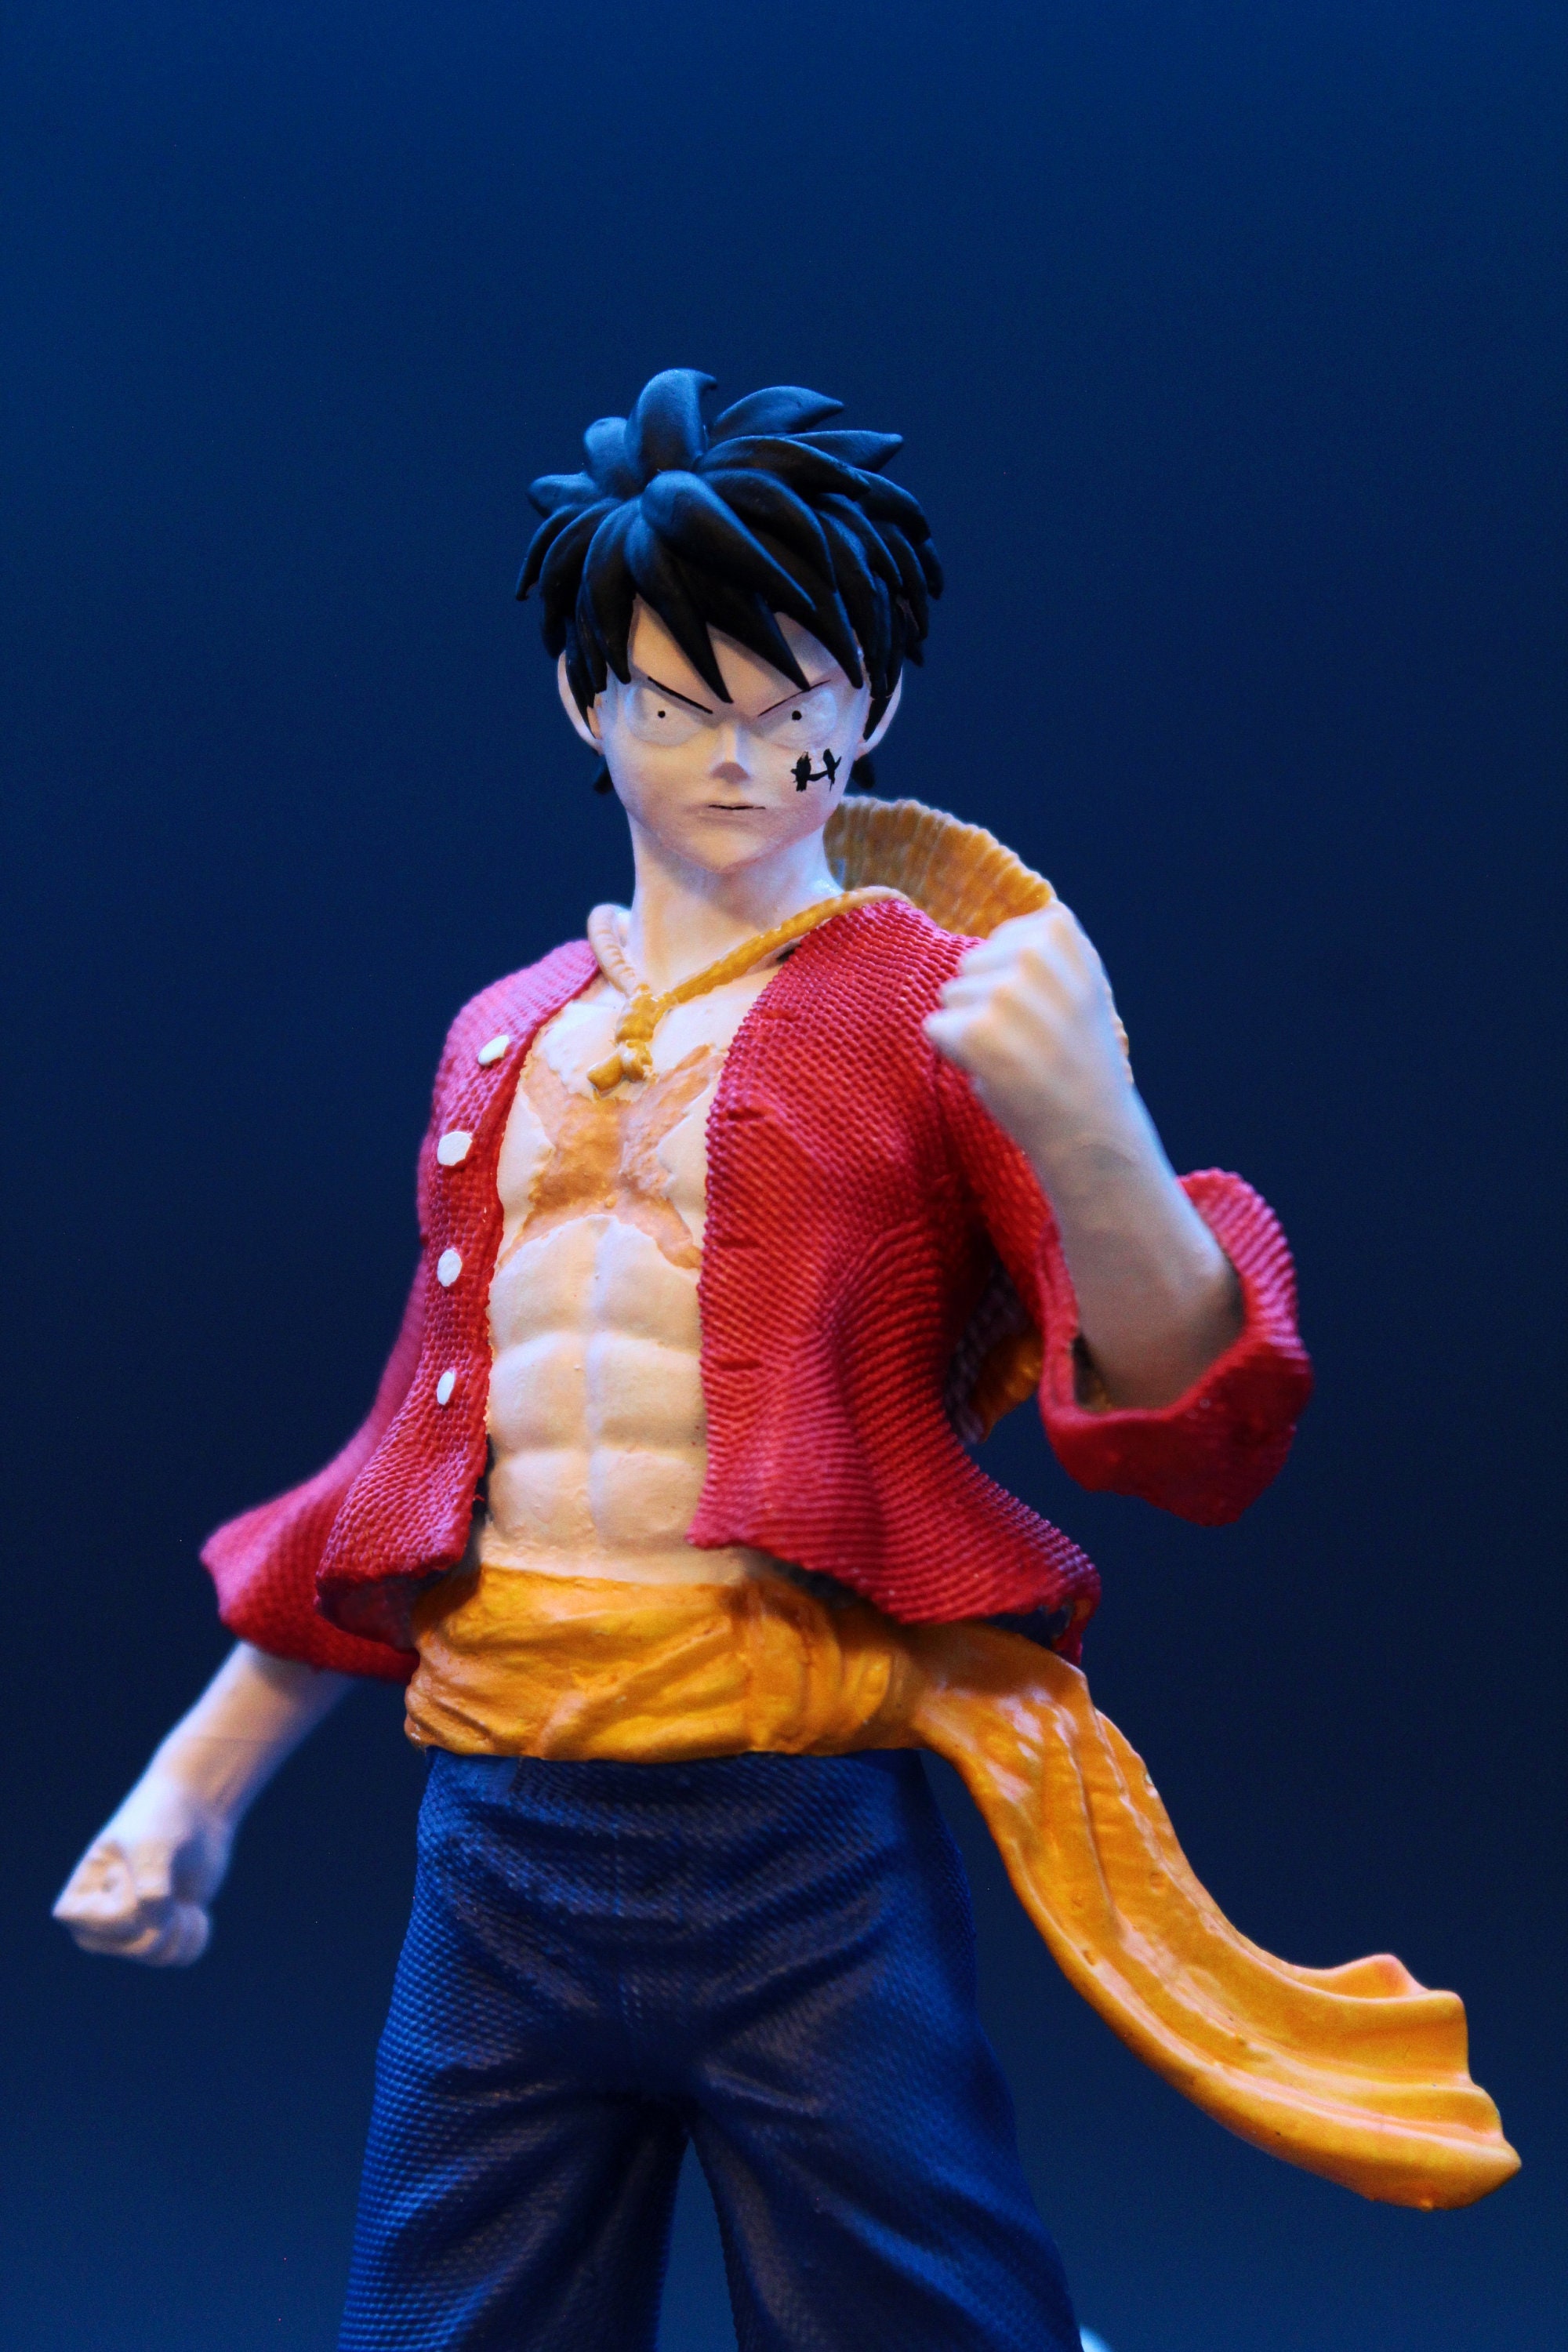 Luffy One Piece Action Figures for sale in Boise, Idaho, Facebook  Marketplace